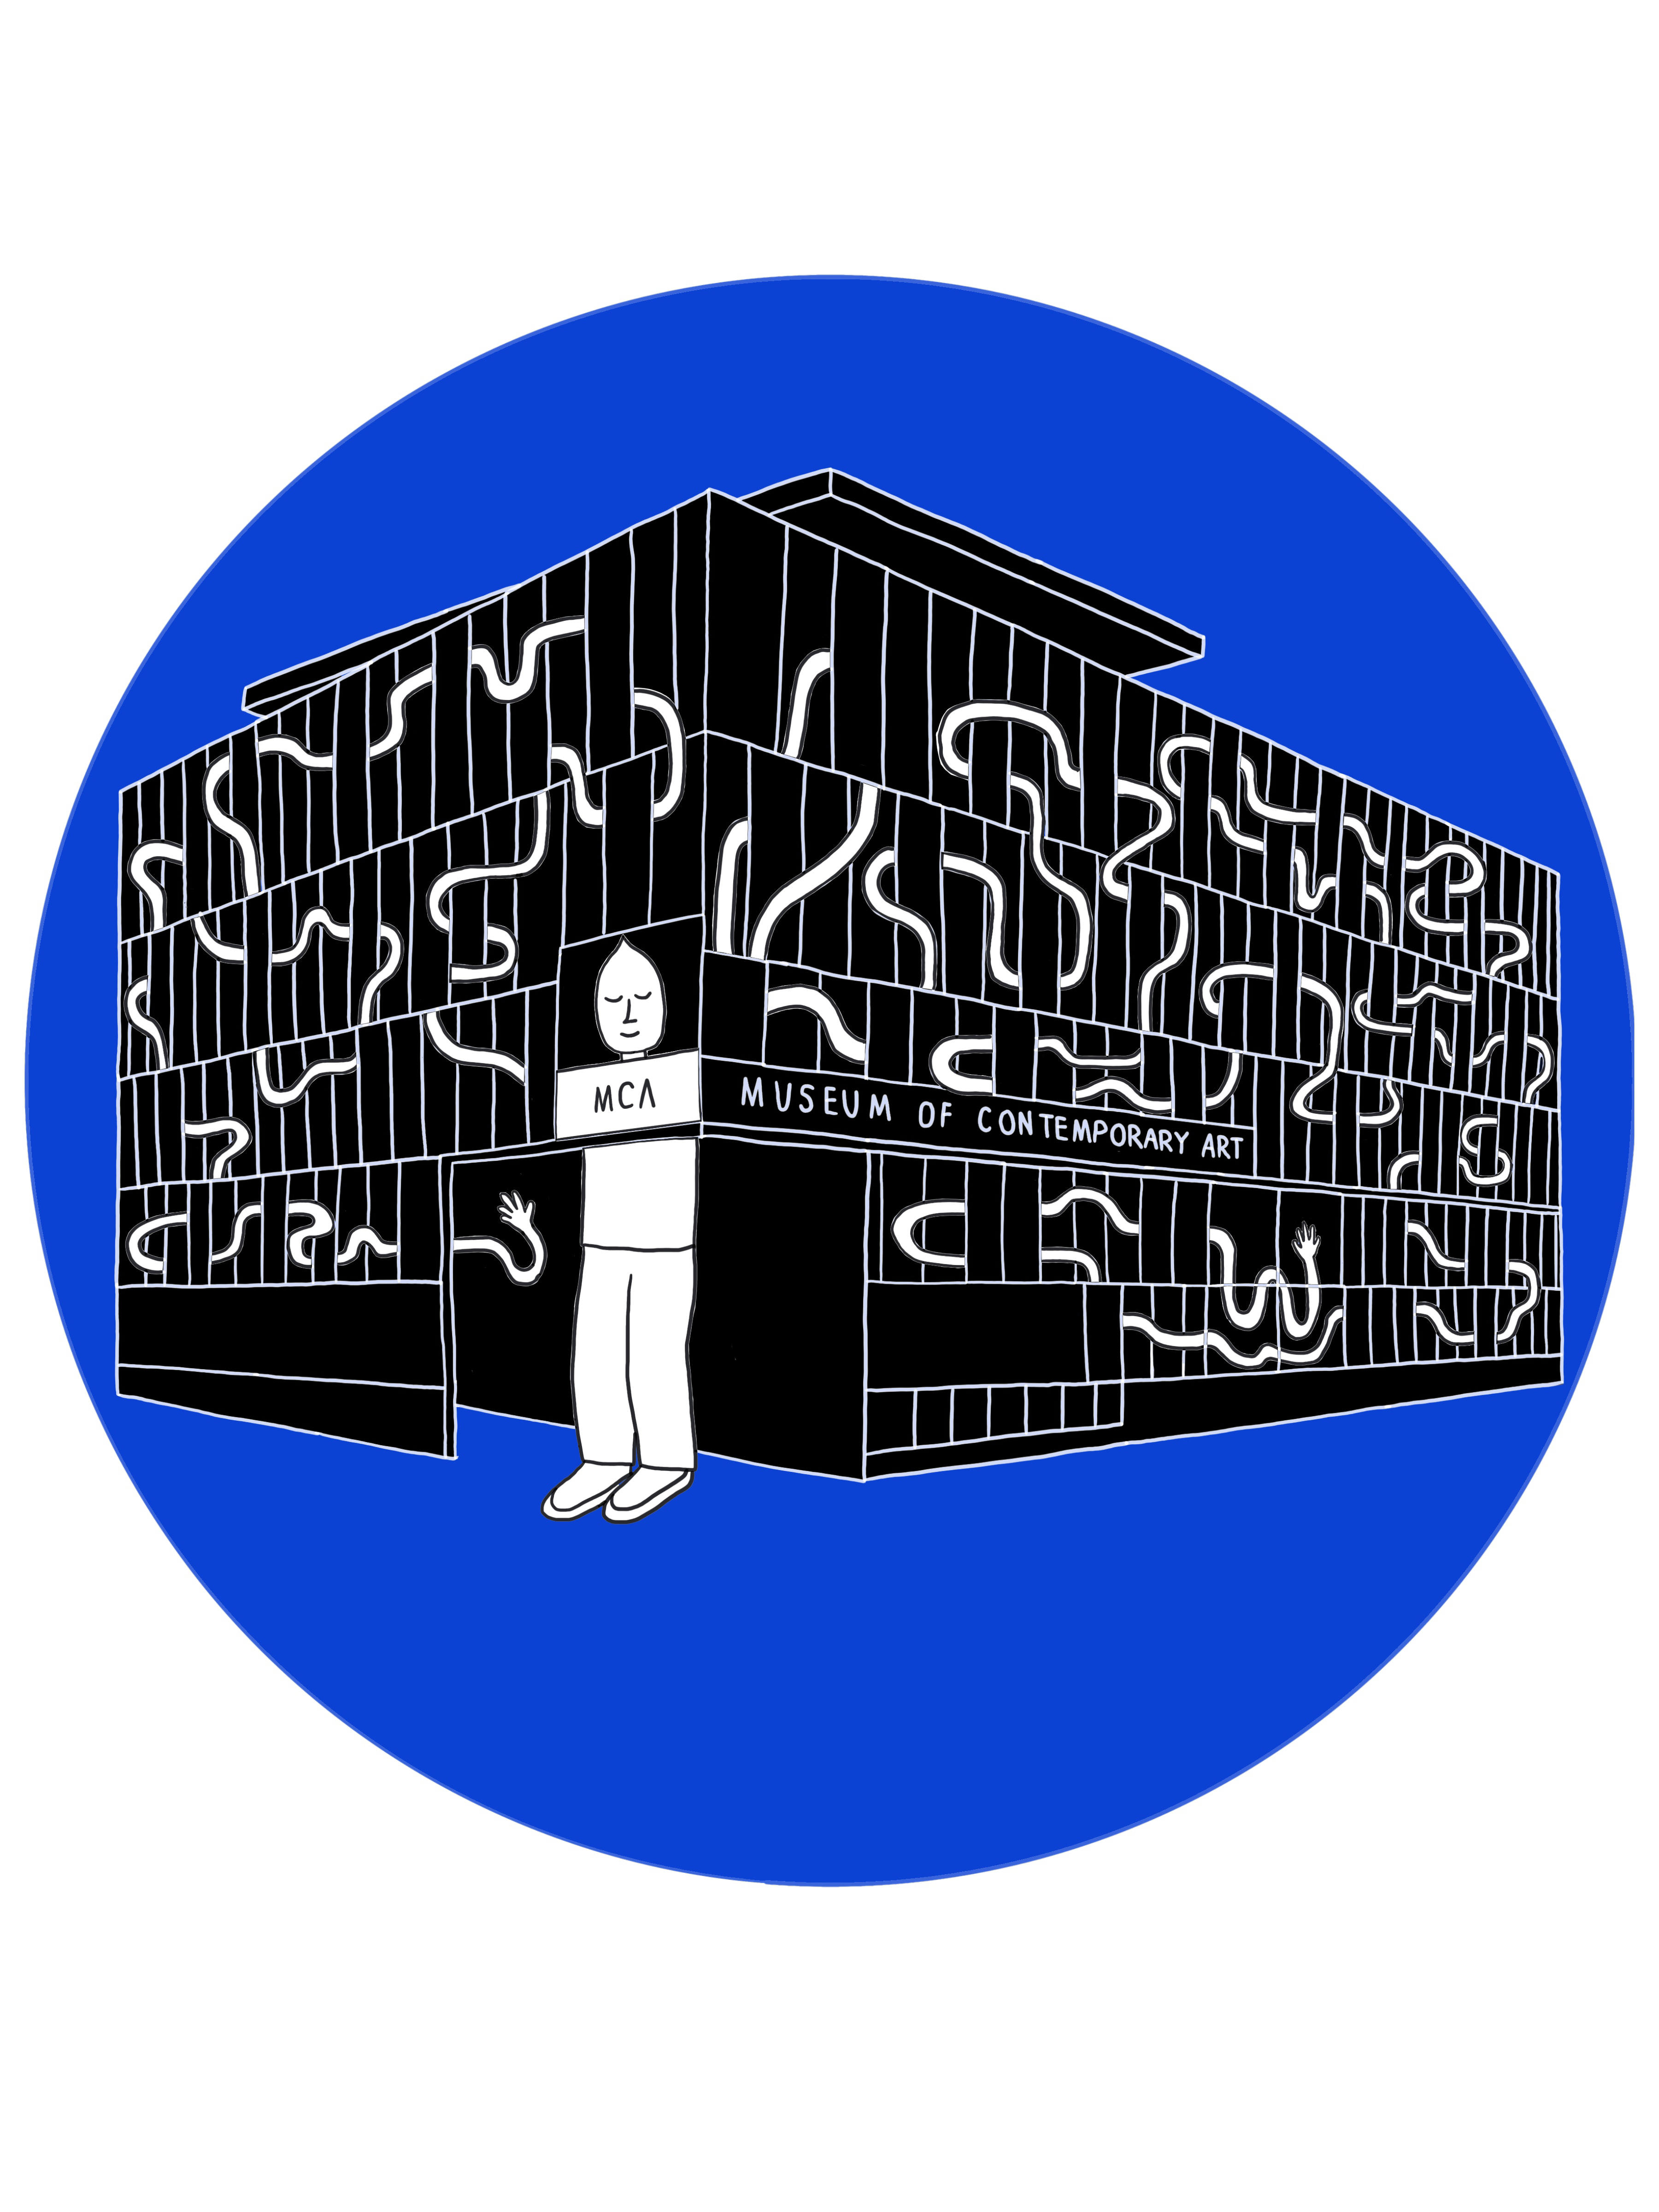  A rendering of the MCA Denver building with a cartoon character, whose arms are weaving in and out of the museum to symbolize exploration. His head is facing out of the window and his eyes are closed. The design is place inside a blue circle. 